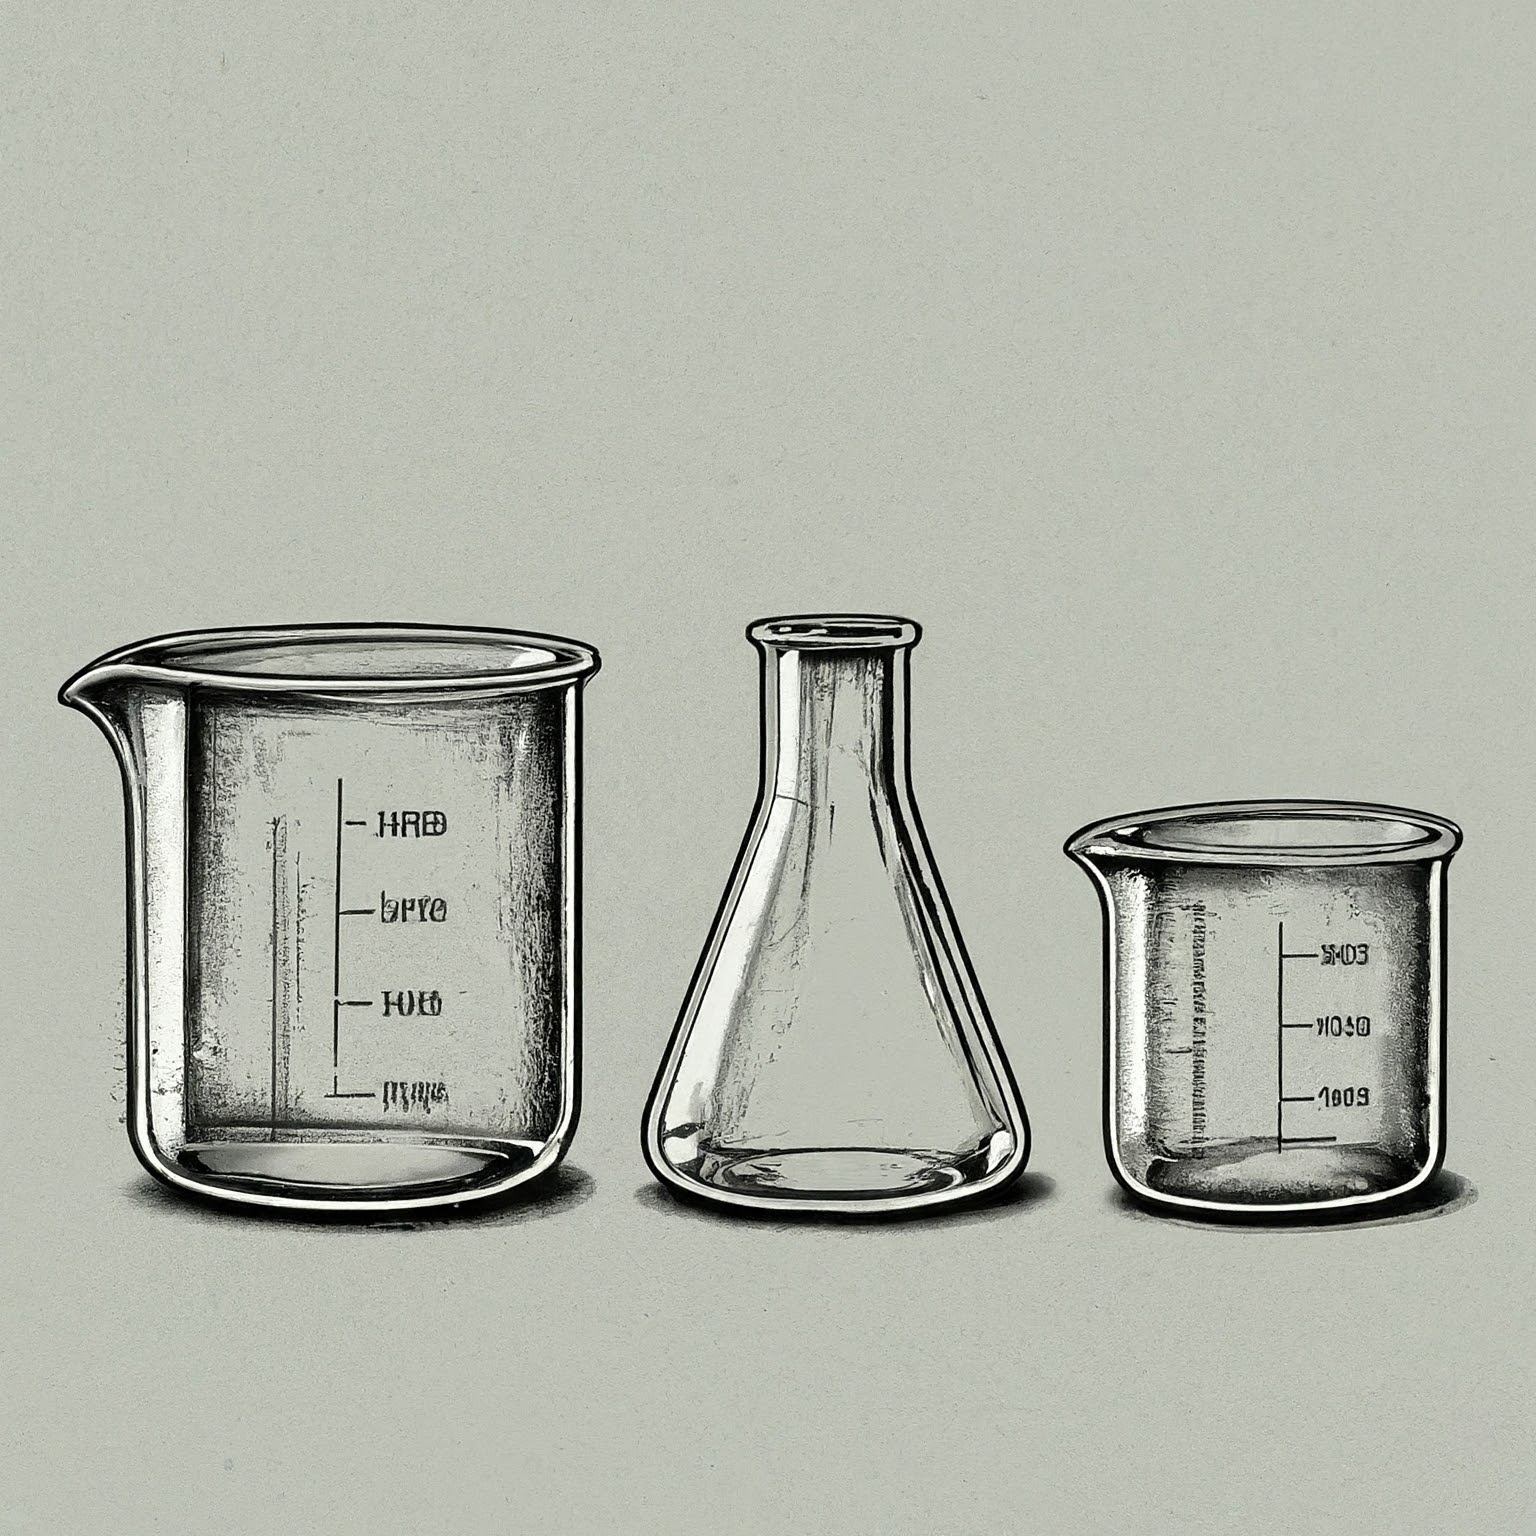 Illustration of various types of chemistry lab beakers